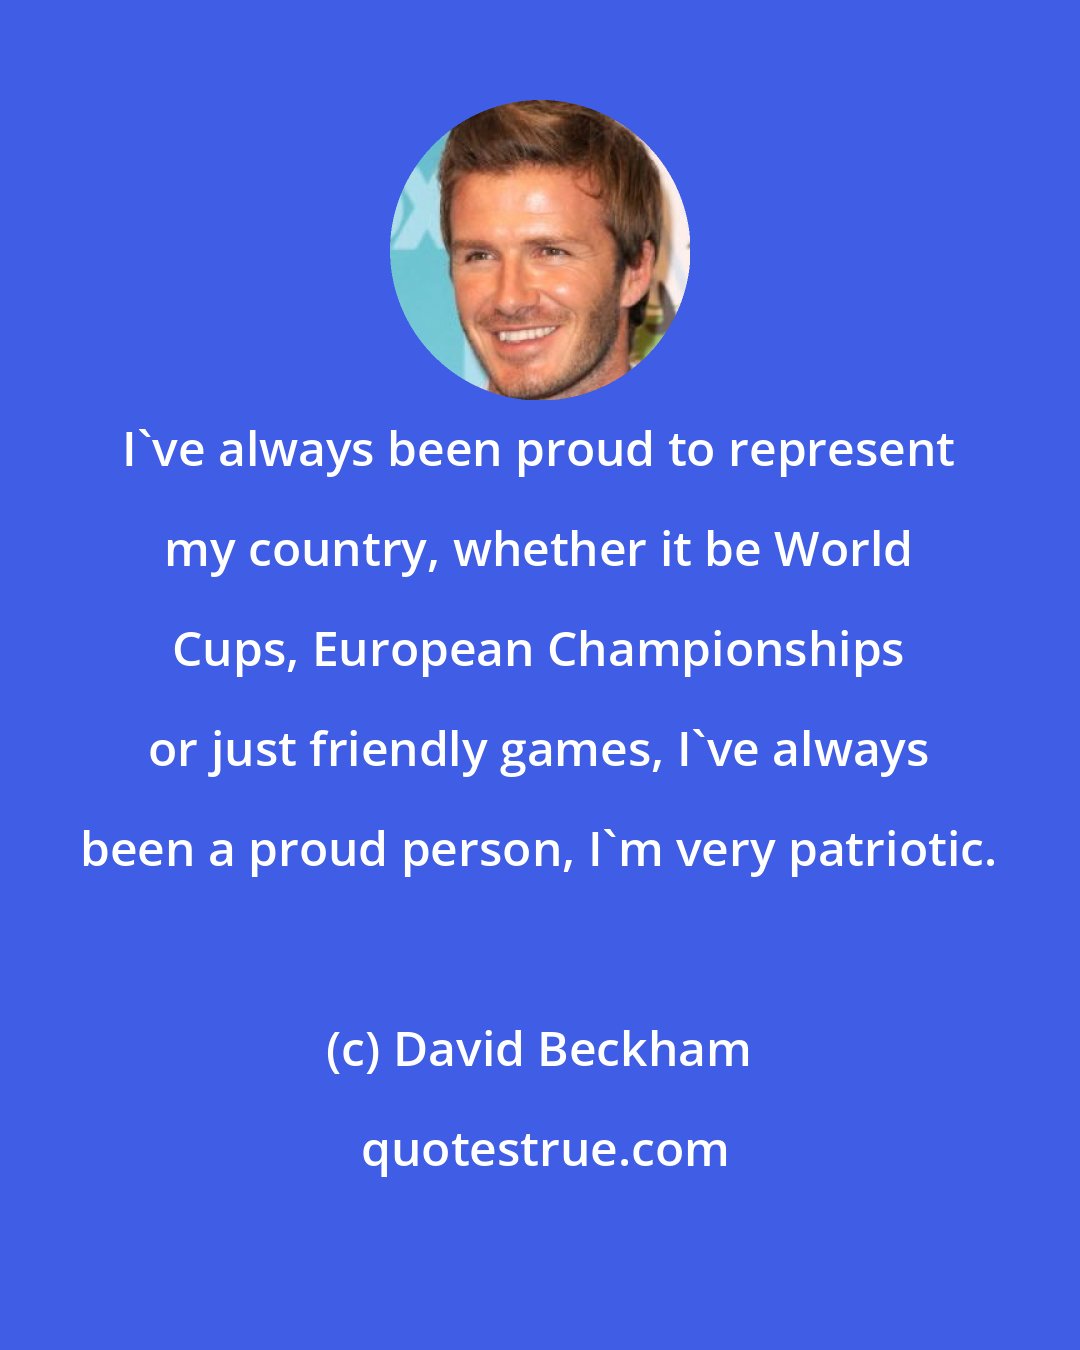 David Beckham: I've always been proud to represent my country, whether it be World Cups, European Championships or just friendly games, I've always been a proud person, I'm very patriotic.